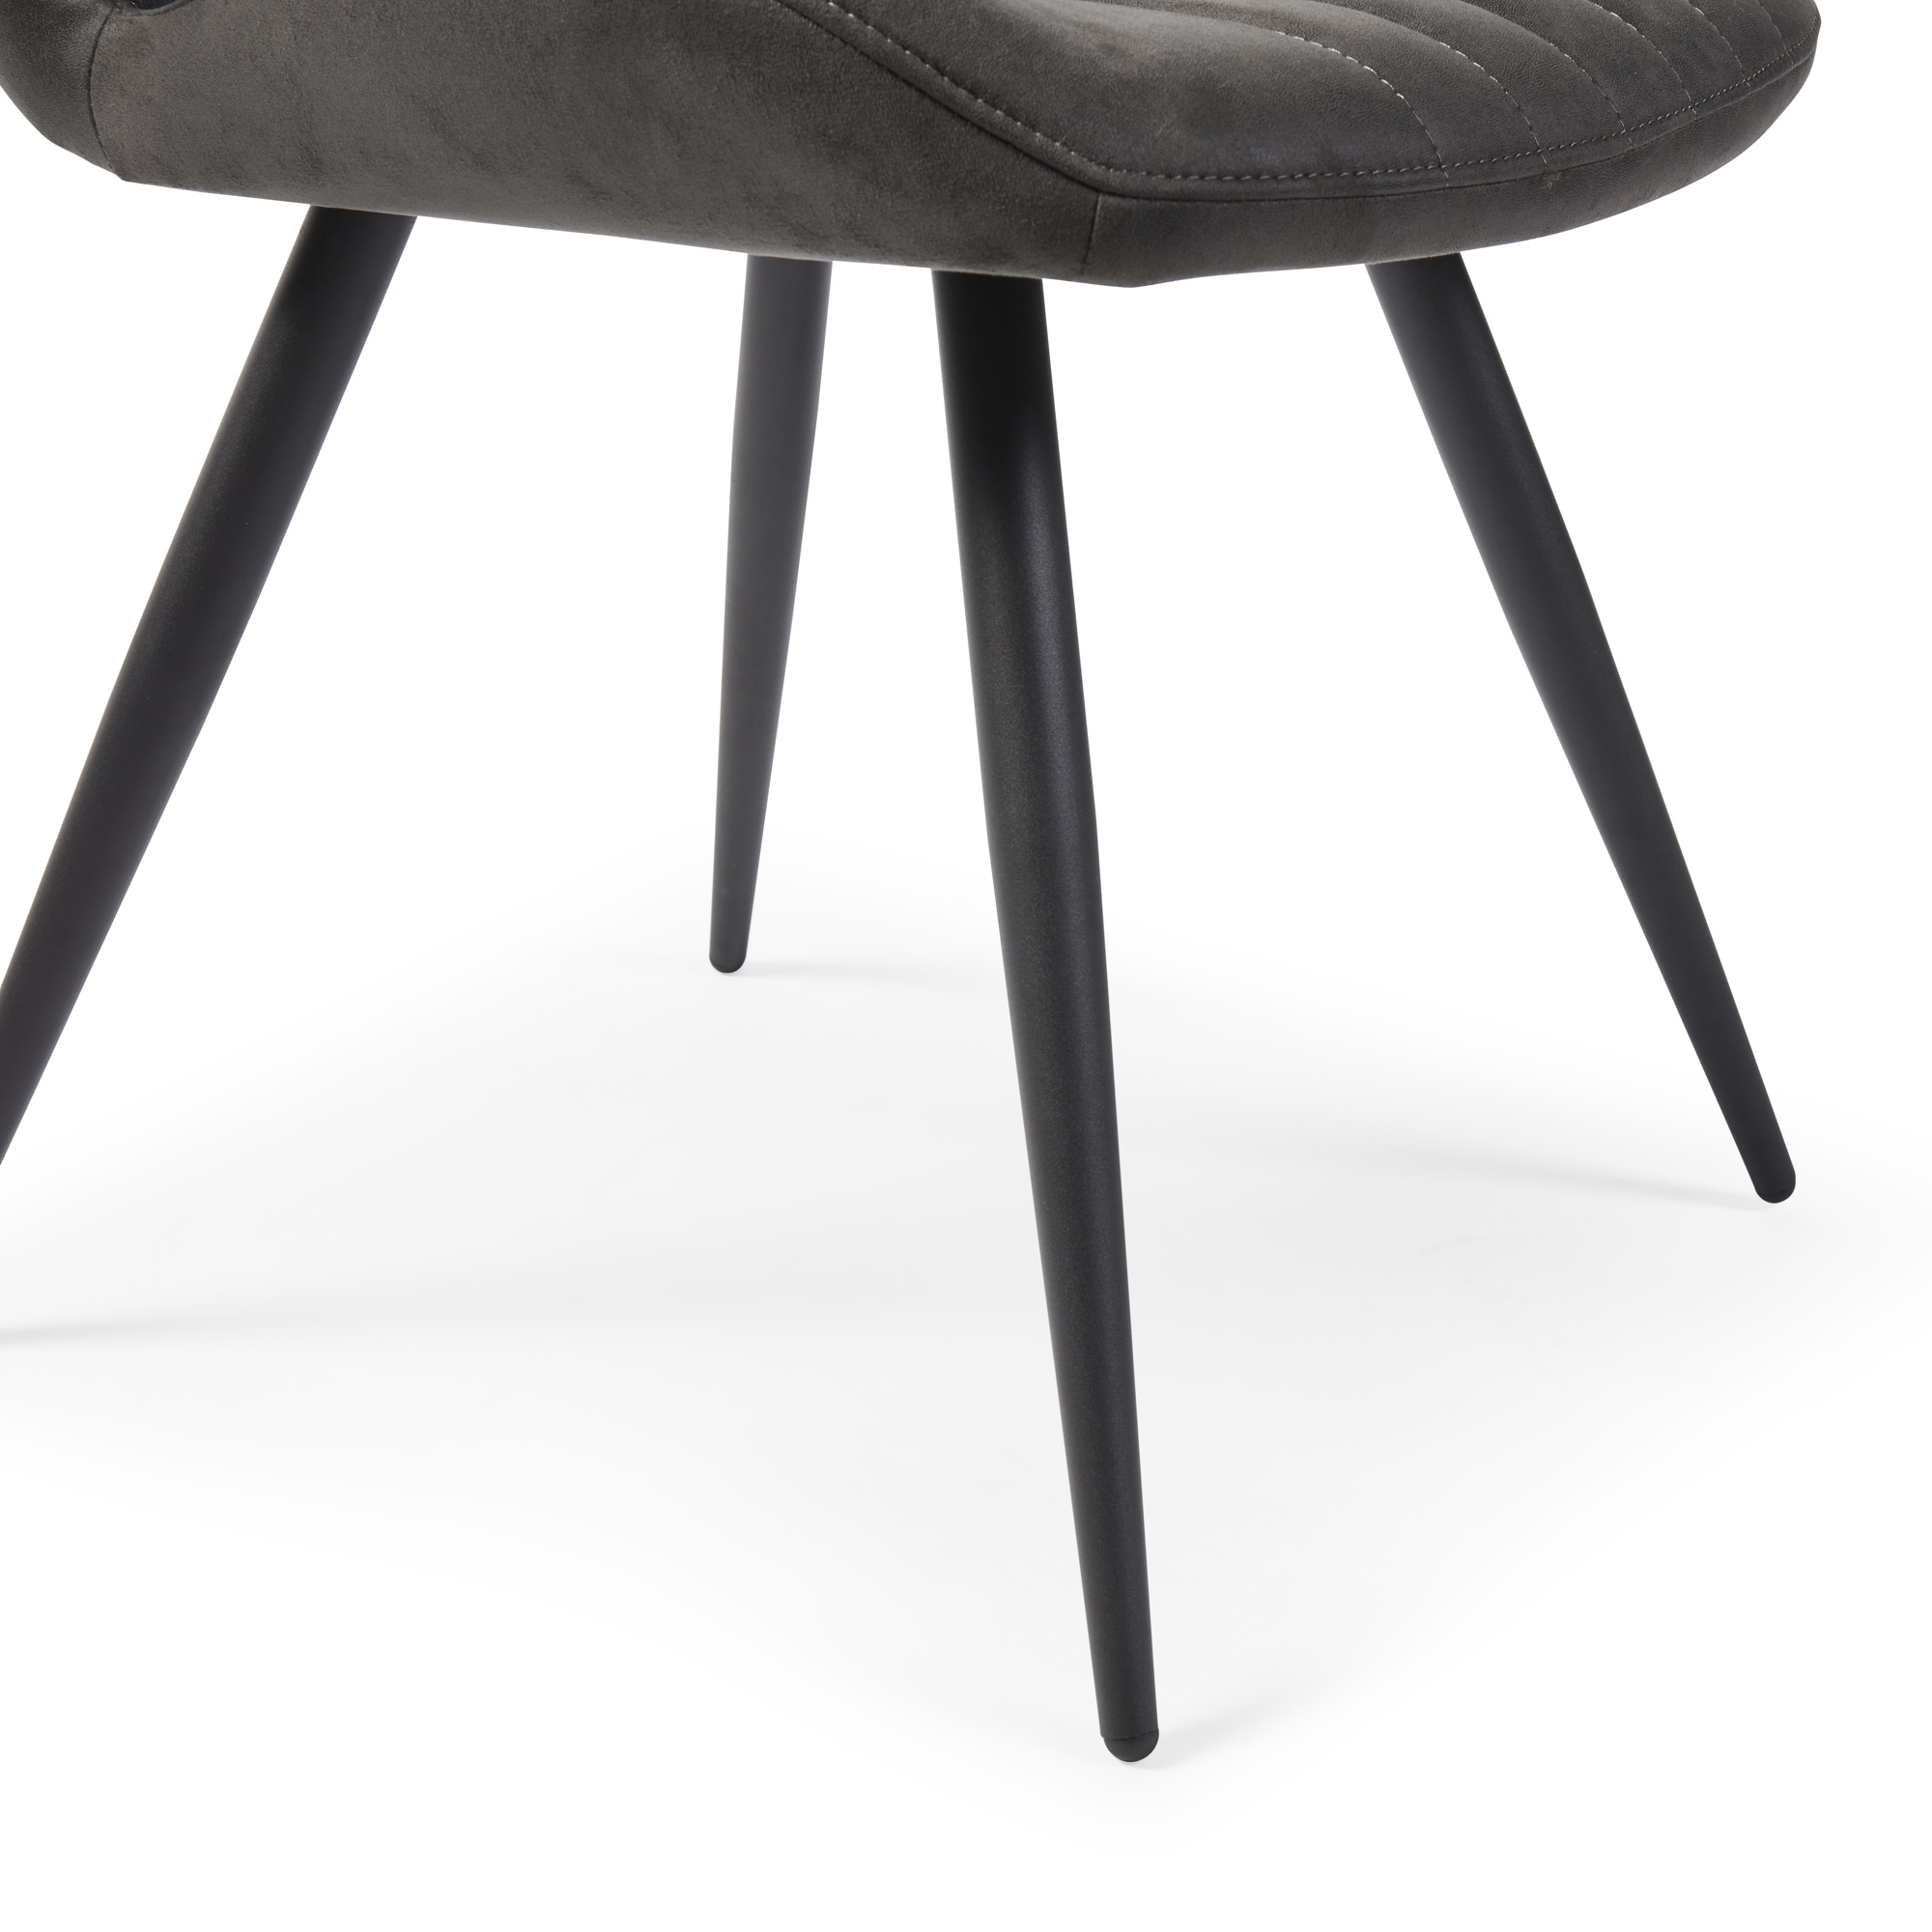 Watson Grey Nubuck Upholstered Dining Chair with Black Legs